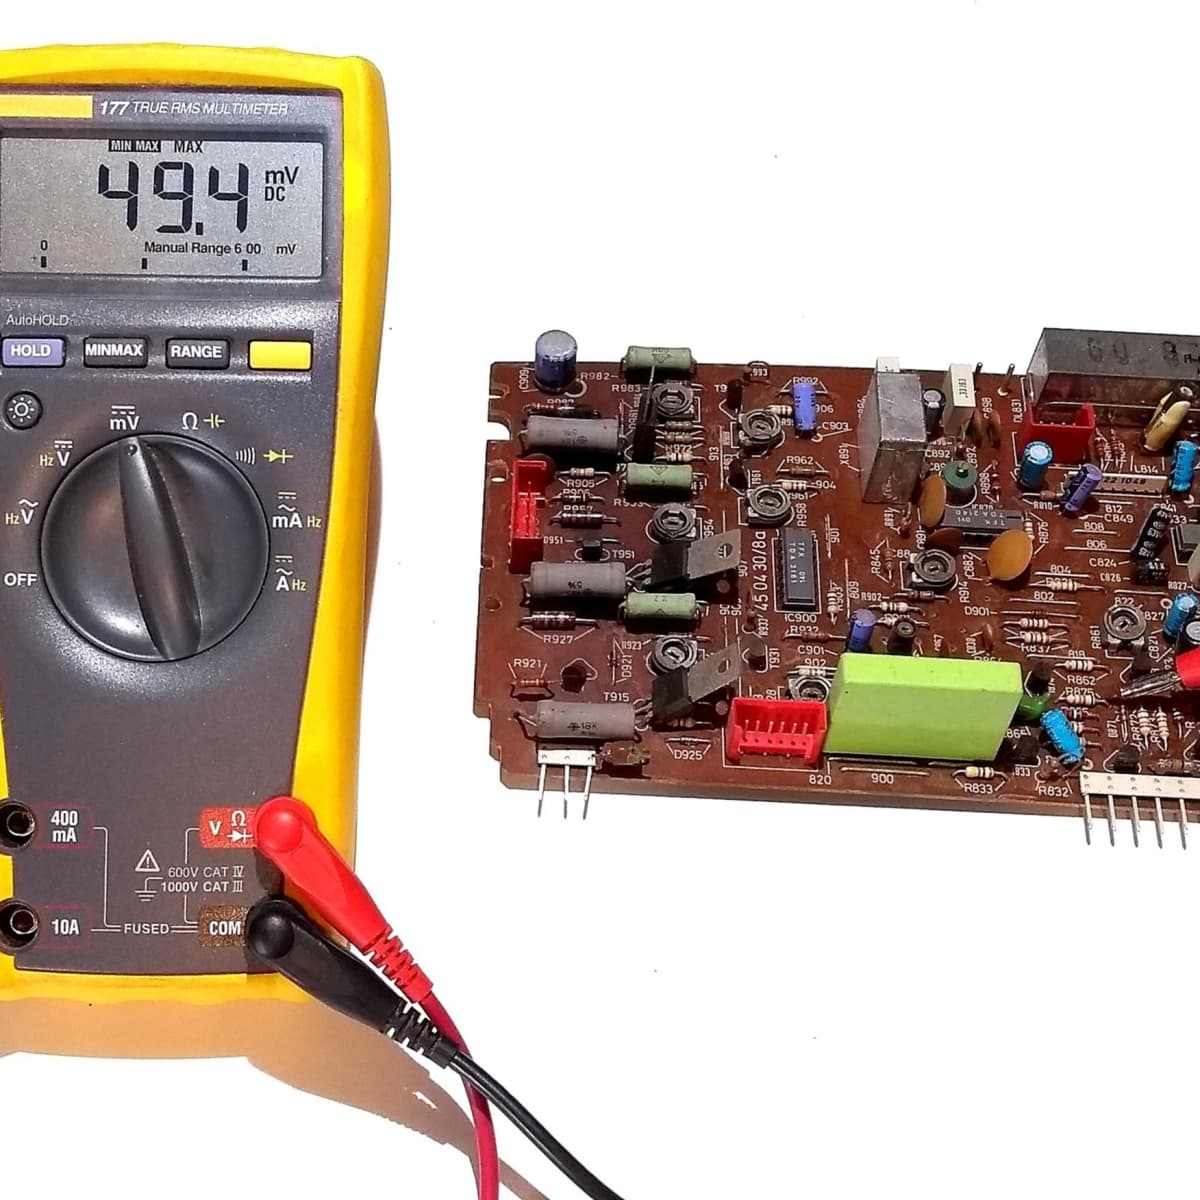 How to Use a Multimeter to Measure Voltage, Current and Resistance -  Dengarden